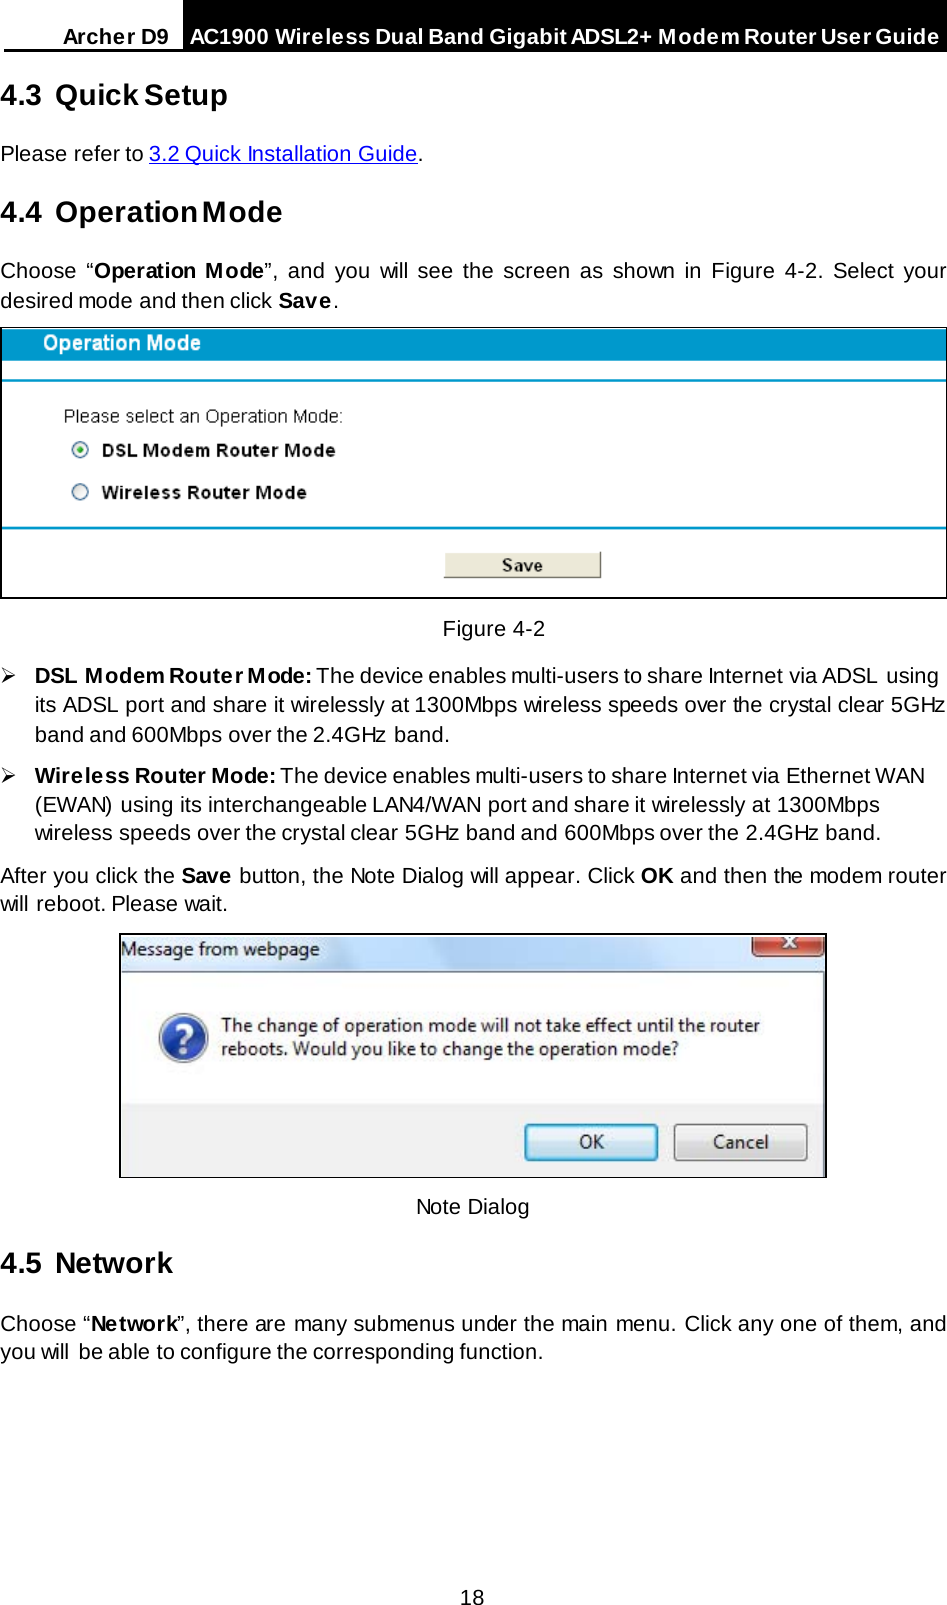 Arche r D9 AC1900 Wireless Dual Band Gigabit ADSL2+ Modem Router User Guide  4.3 Quick Setup Please refer to 3.2 Quick Installation Guide. 4.4 Operation Mode Choose “Operation Mode”, and you will see the screen as shown in Figure 4-2. Select your desired mode and then click Save.  Figure 4-2  DSL Modem Router Mode: The device enables multi-users to share Internet via ADSL using its ADSL port and share it wirelessly at 1300Mbps wireless speeds over the crystal clear 5GHz band and 600Mbps over the 2.4GHz  band.  Wireless Router Mode: The device enables multi-users to share Internet via Ethernet WAN (EWAN) using its interchangeable LAN4/WAN  port and share it wirelessly at 1300Mbps wireless speeds over the crystal clear 5GHz band and 600Mbps over the 2.4GHz band. After you click the Save button, the Note Dialog will appear. Click OK and then the modem router will reboot. Please wait.  Note Dialog 4.5 Network Choose “Network”, there are many submenus under the main menu. Click any one of them, and you will  be able to configure the corresponding function.  18 